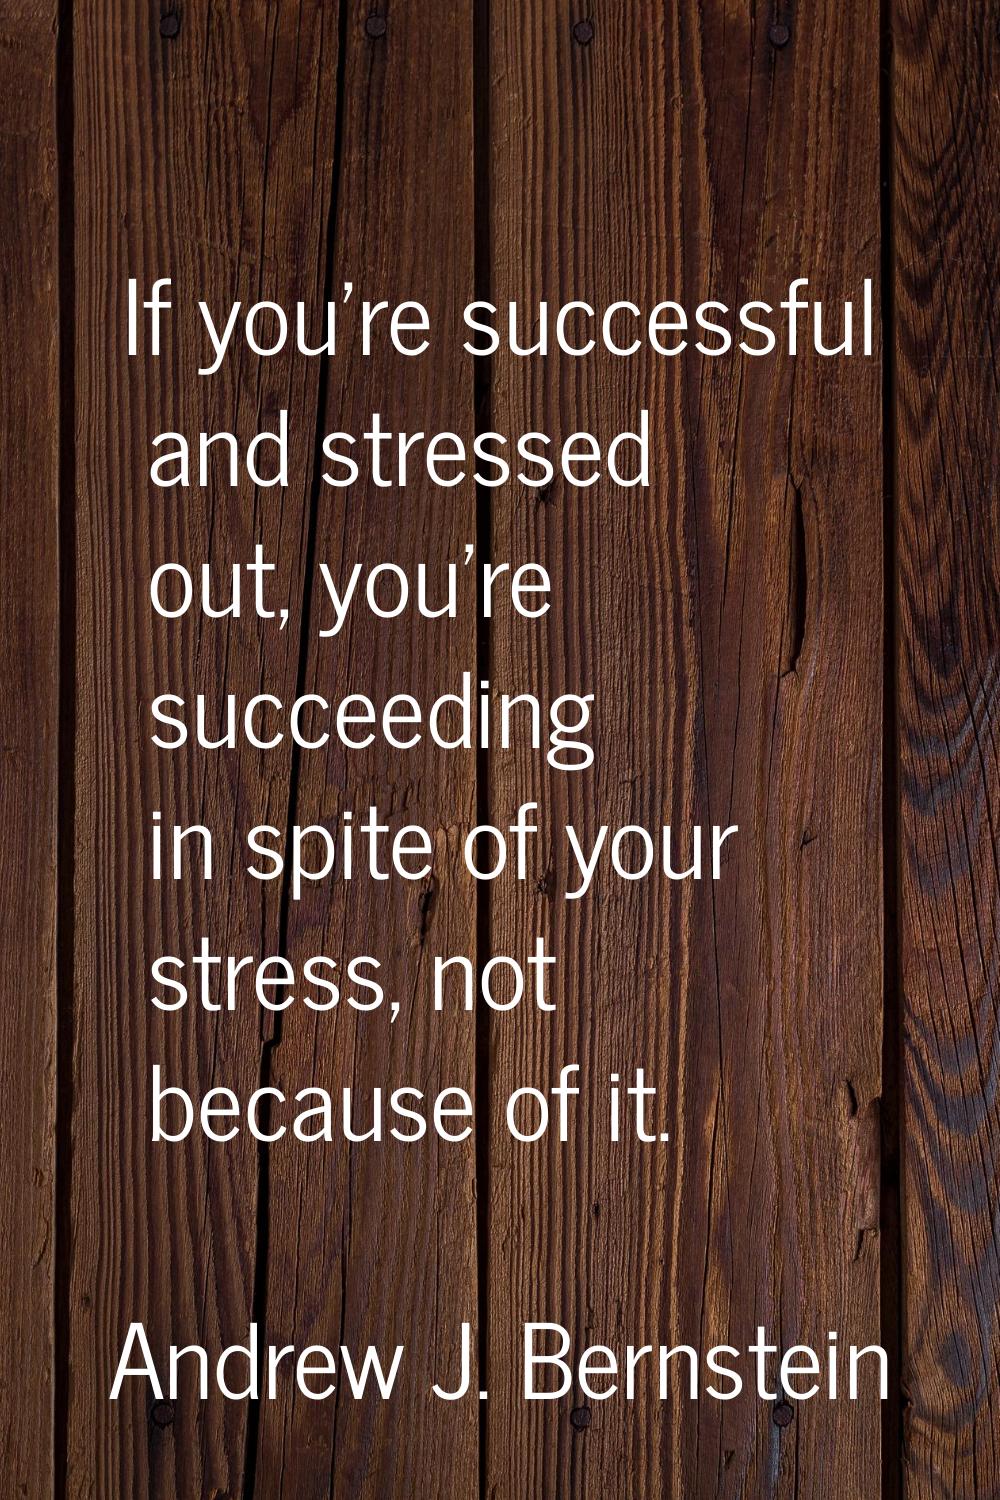 If you're successful and stressed out, you're succeeding in spite of your stress, not because of it